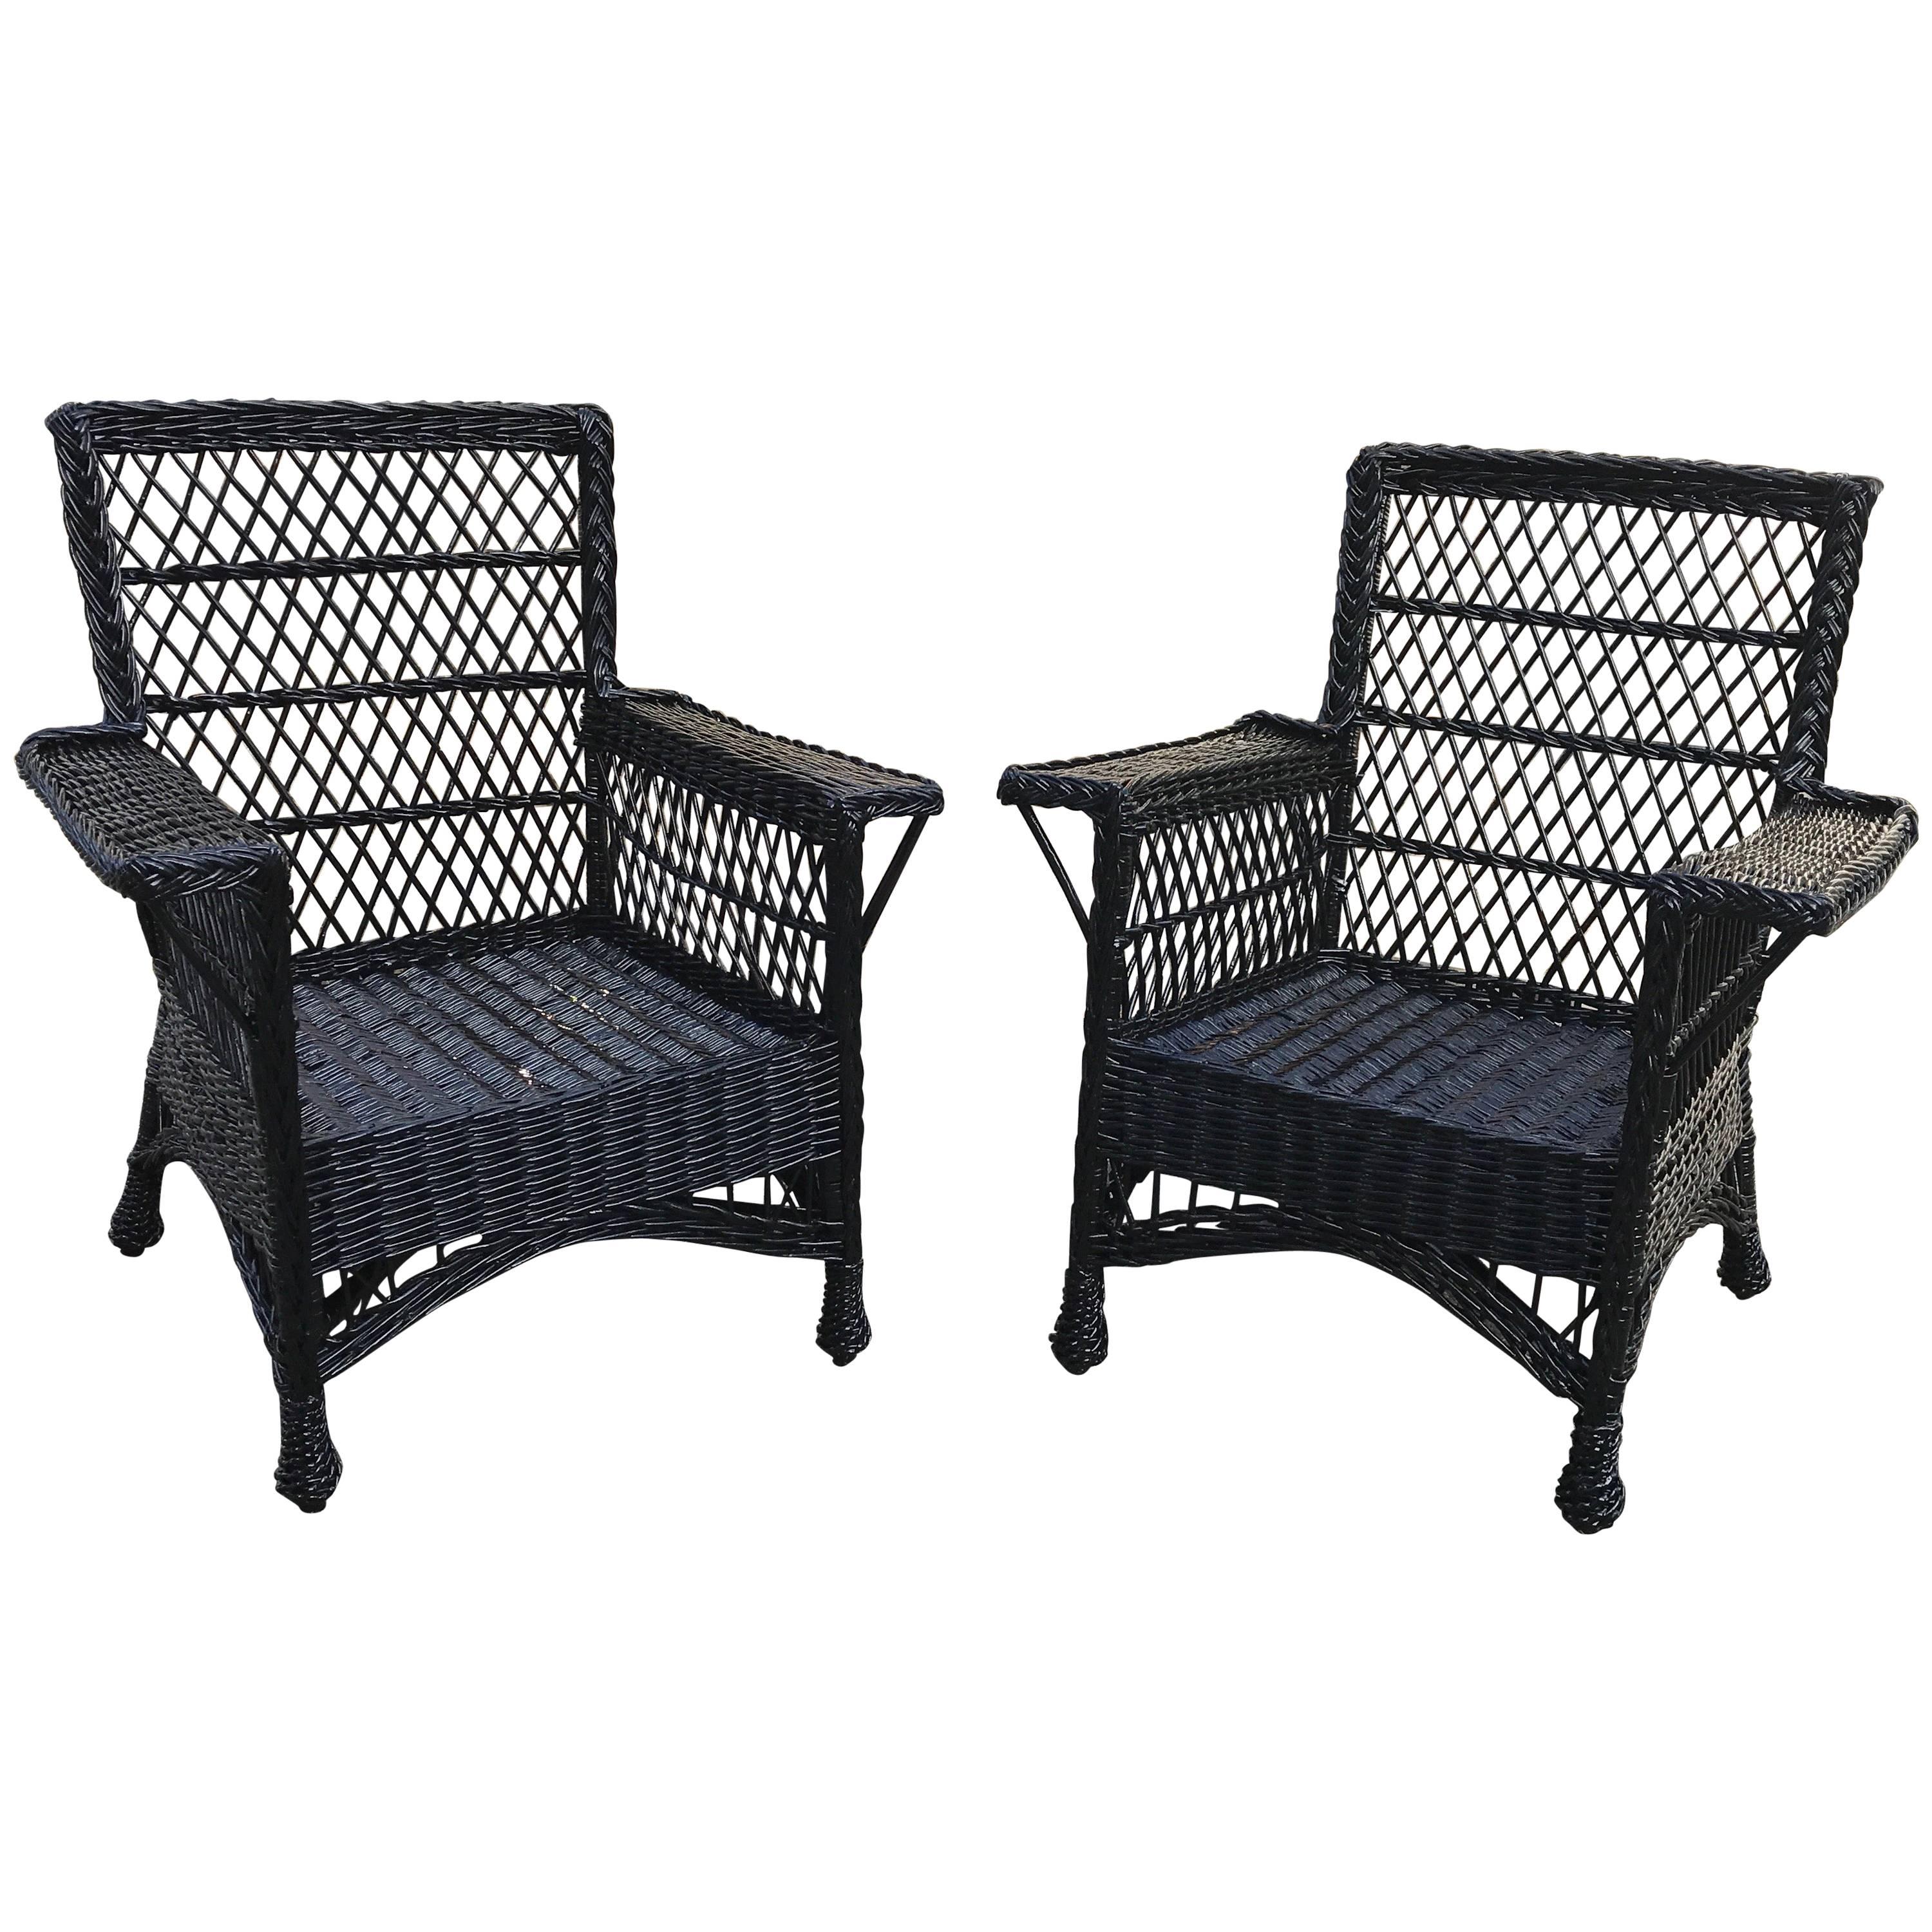 Antique Bar Harbor Wicker Willow Chairs